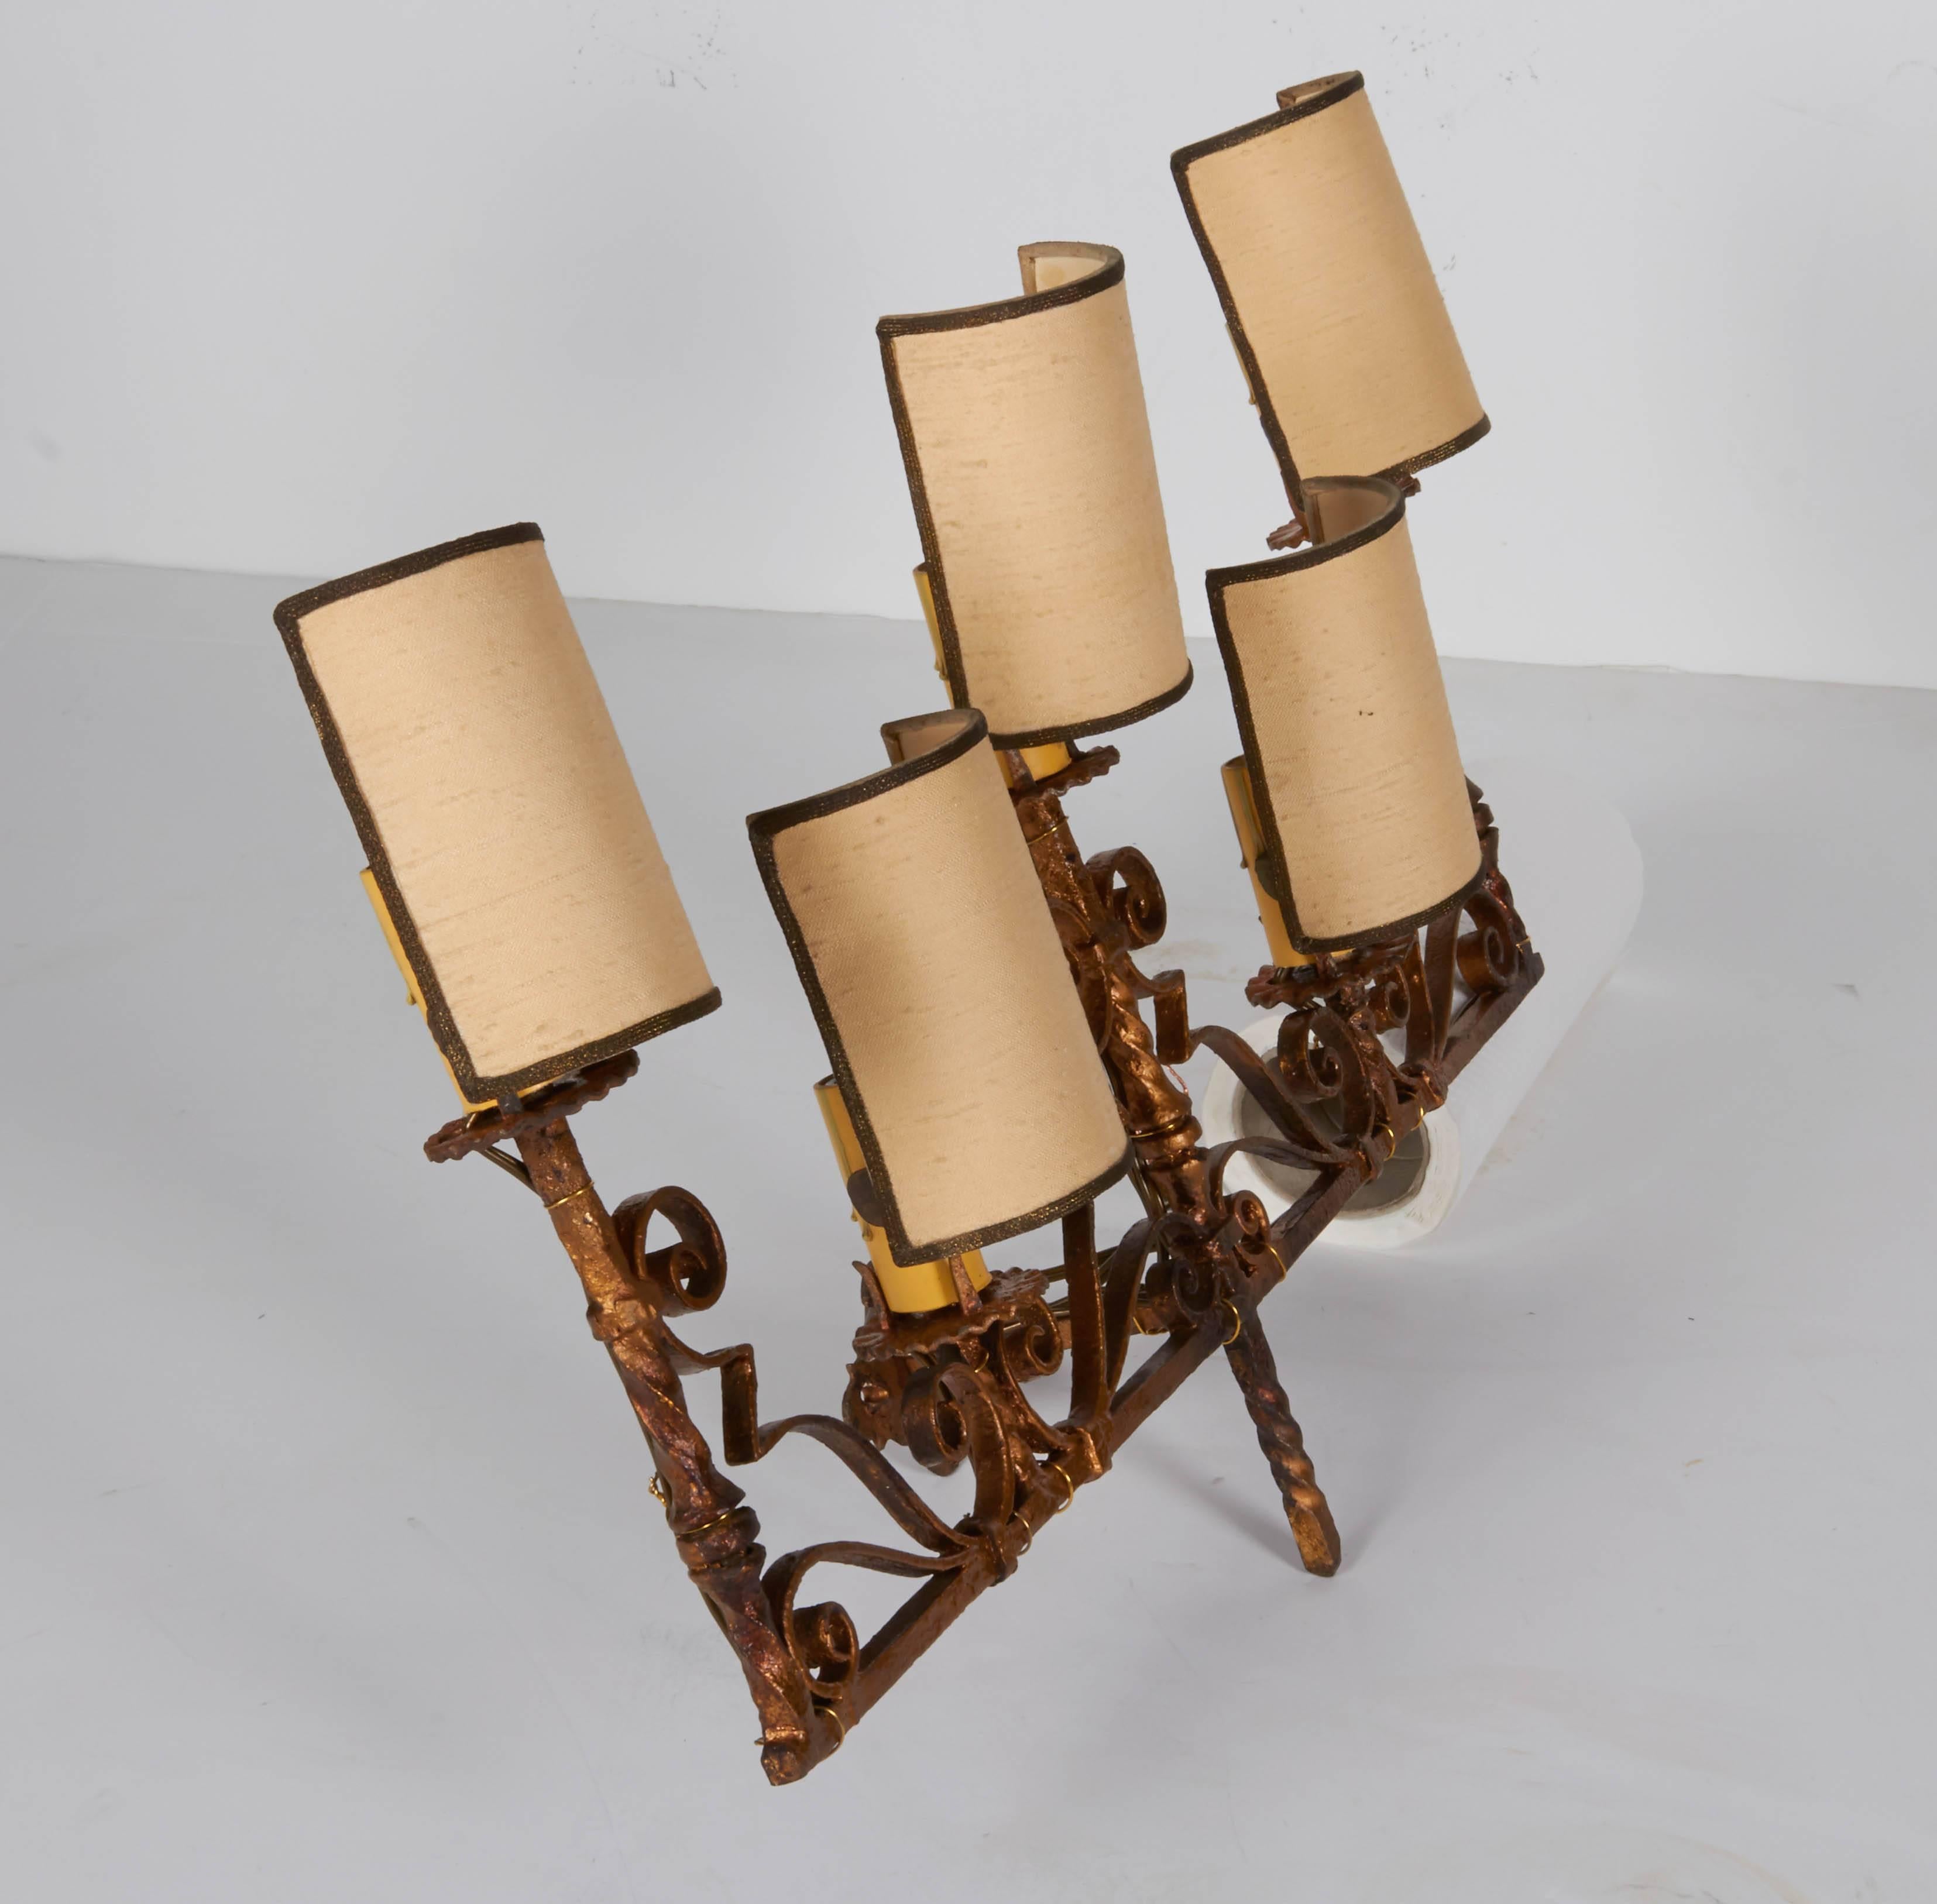 A wonderful pair of Italian 1920s gilt iron sconces. Each sconce holds five candelabra bulbs and comes with on shades. Shades are circa 1950 and attached to sconces when found. Each sconce measures 19.5